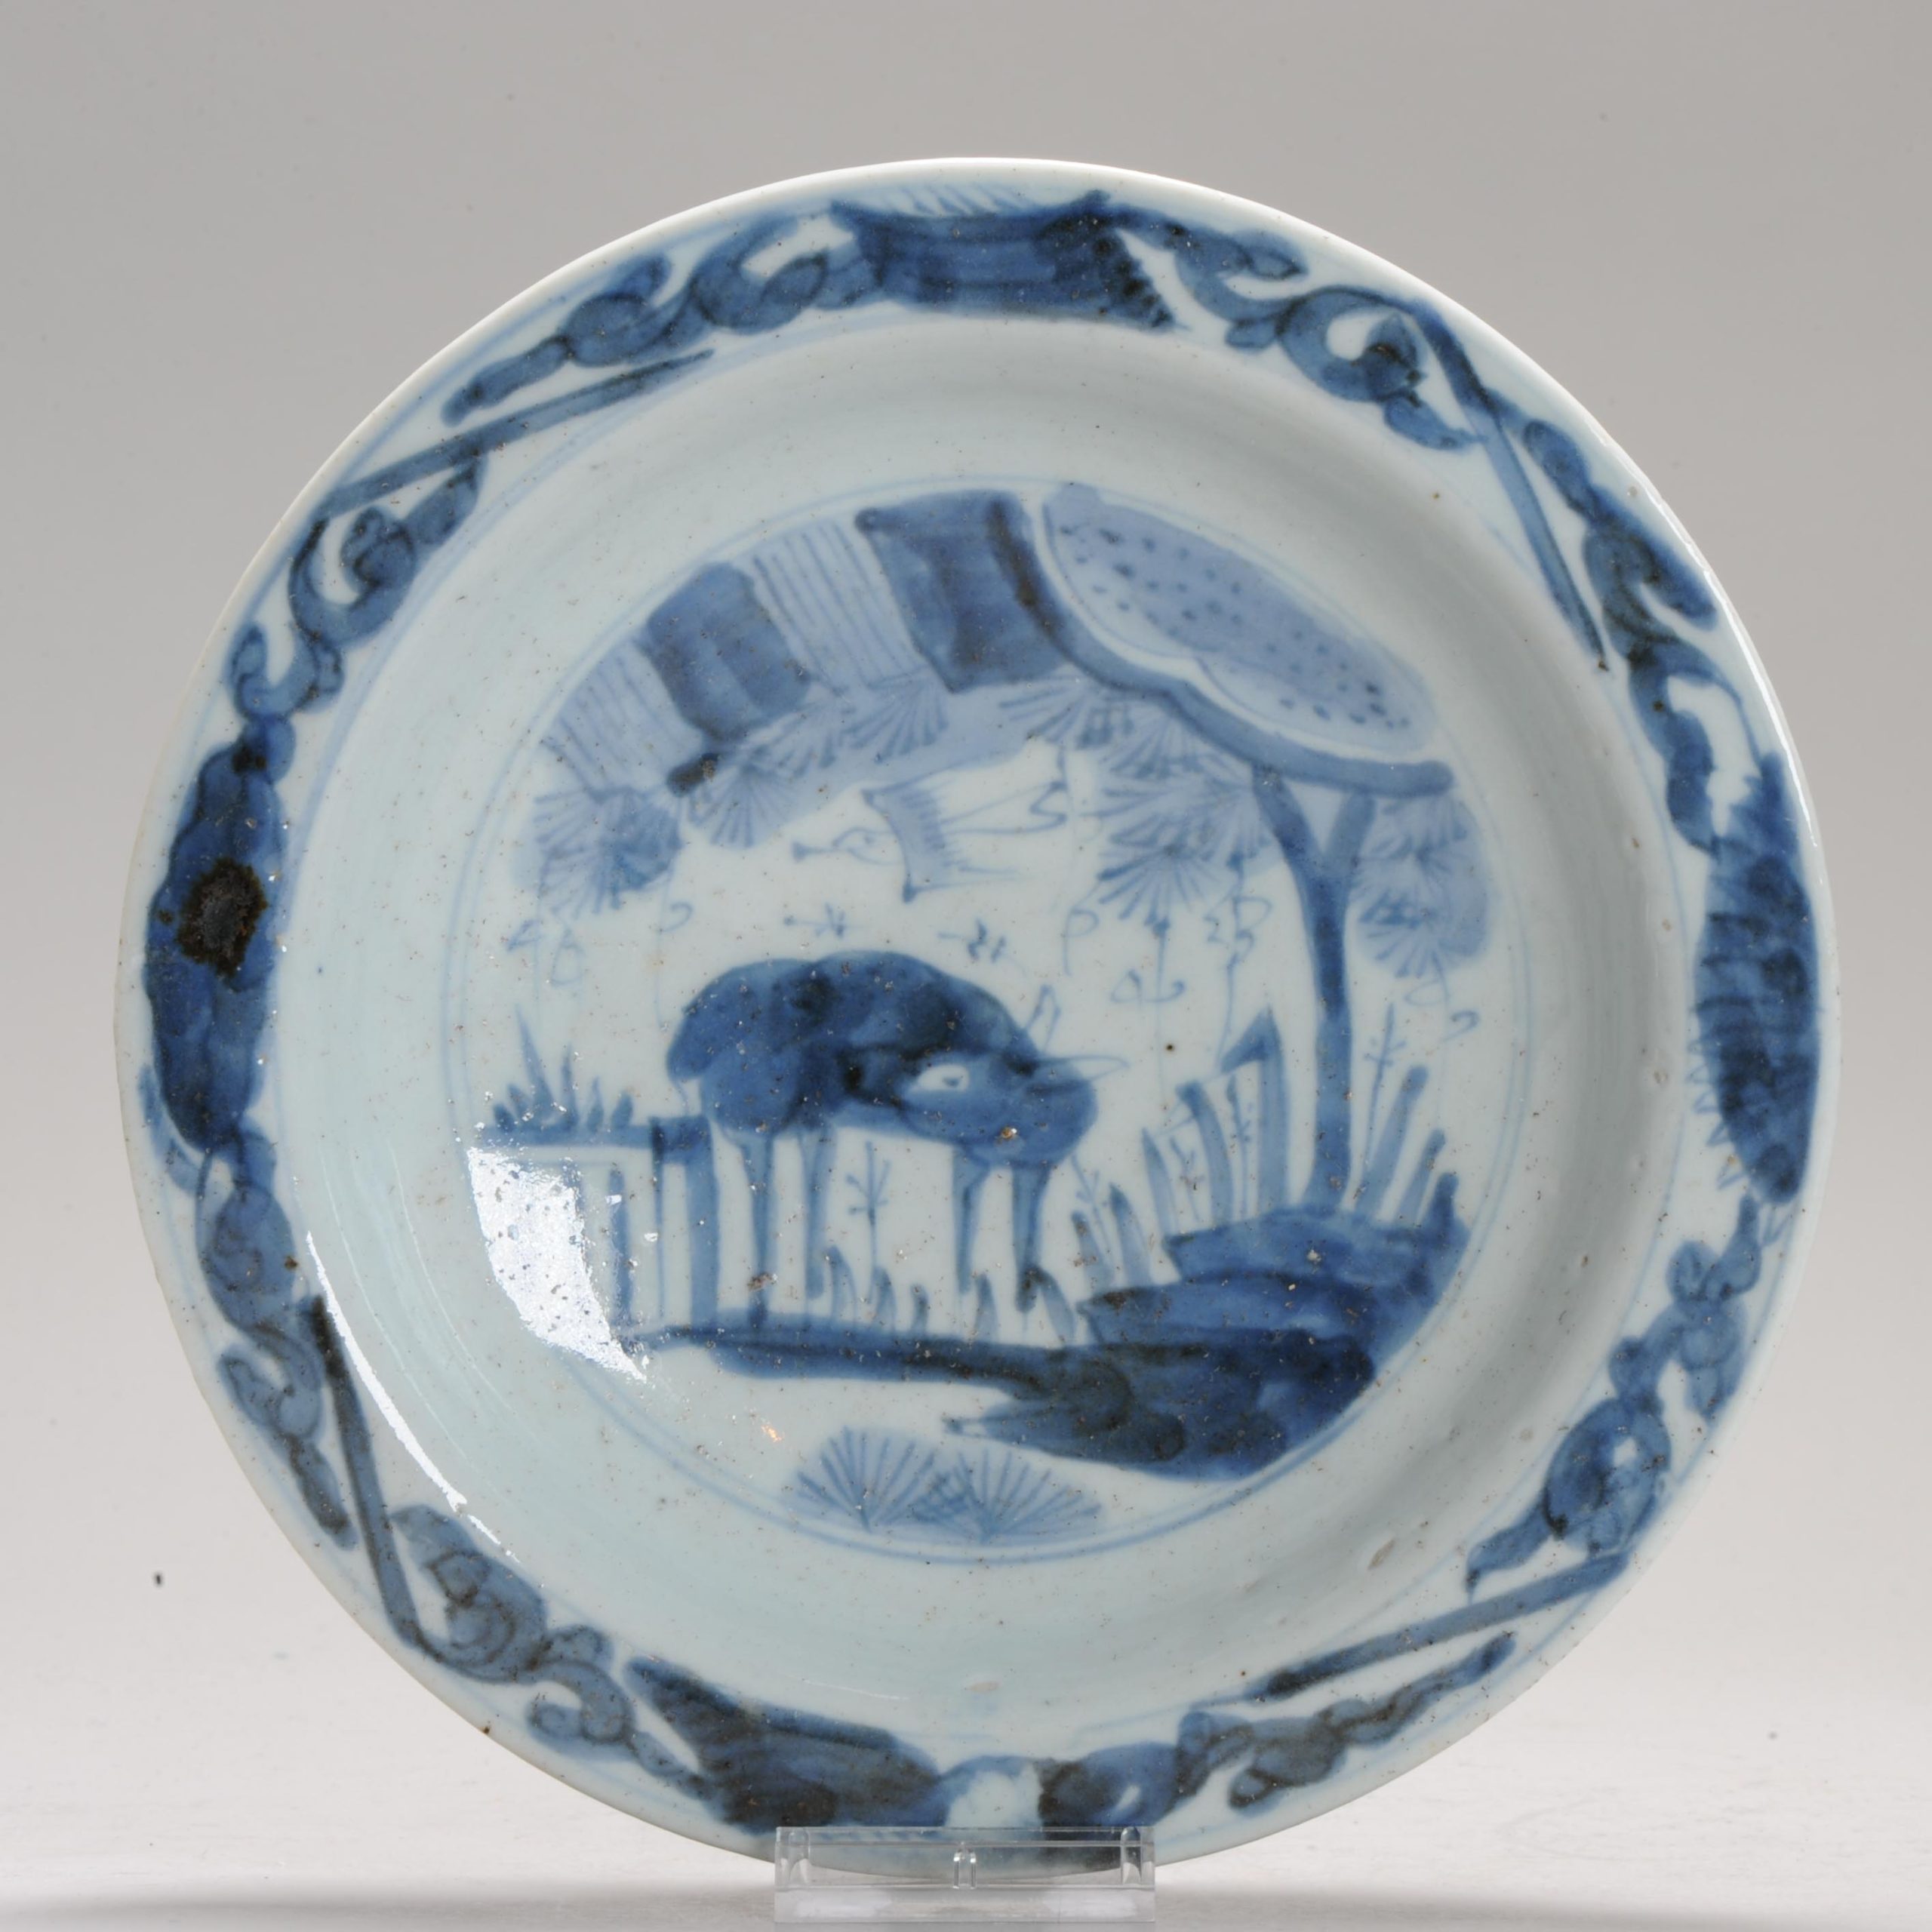 1178 A Chinese porcelain Ming Blue and White Dish with Deers.